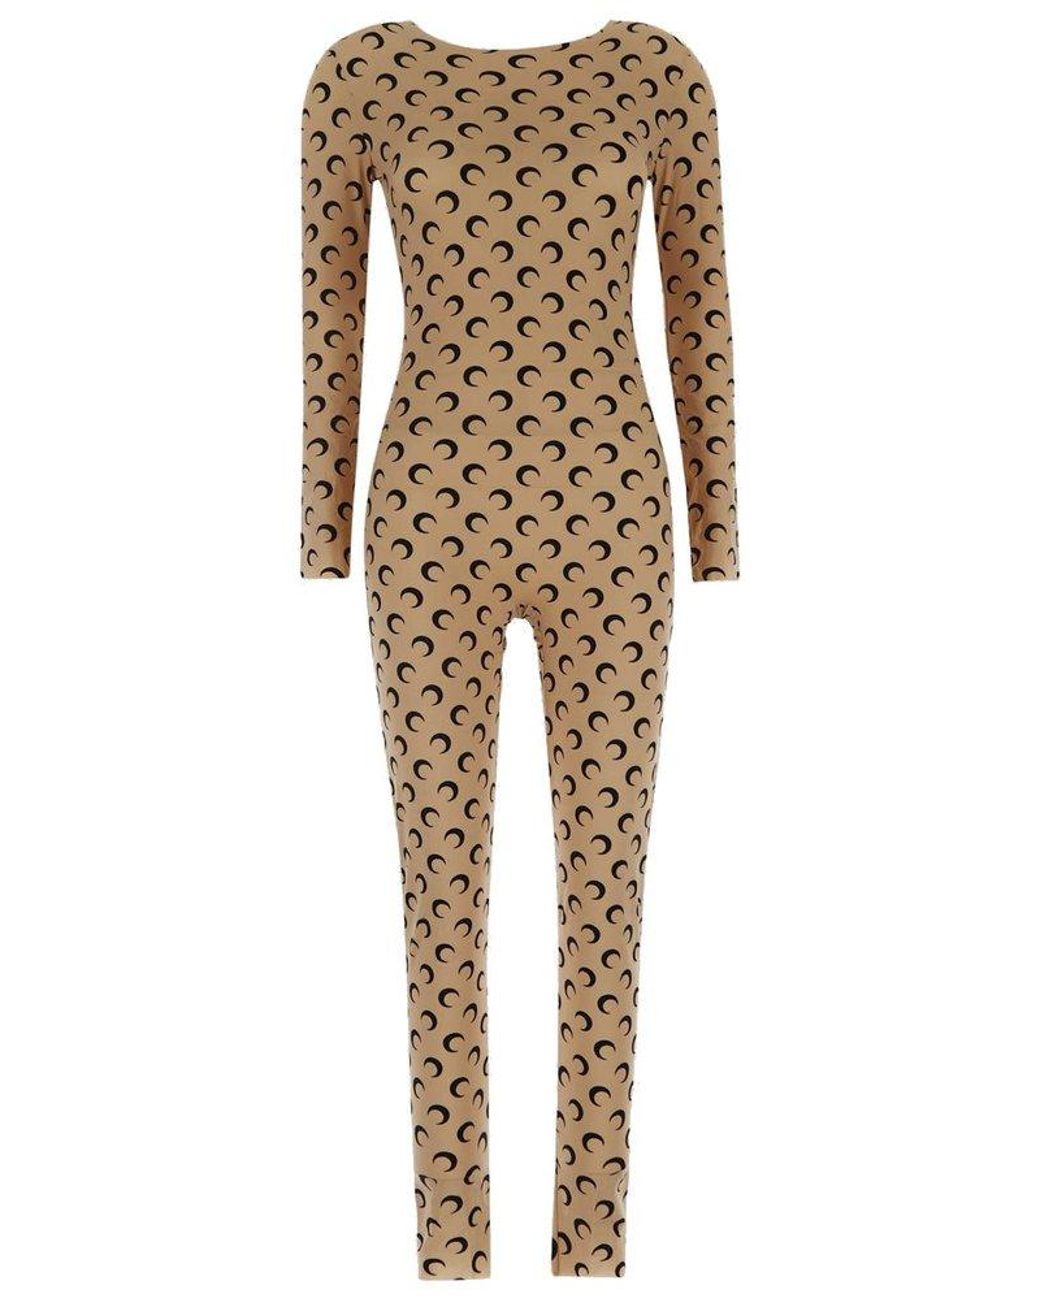 Marine Serre Printed Catsuit in Natural | Lyst